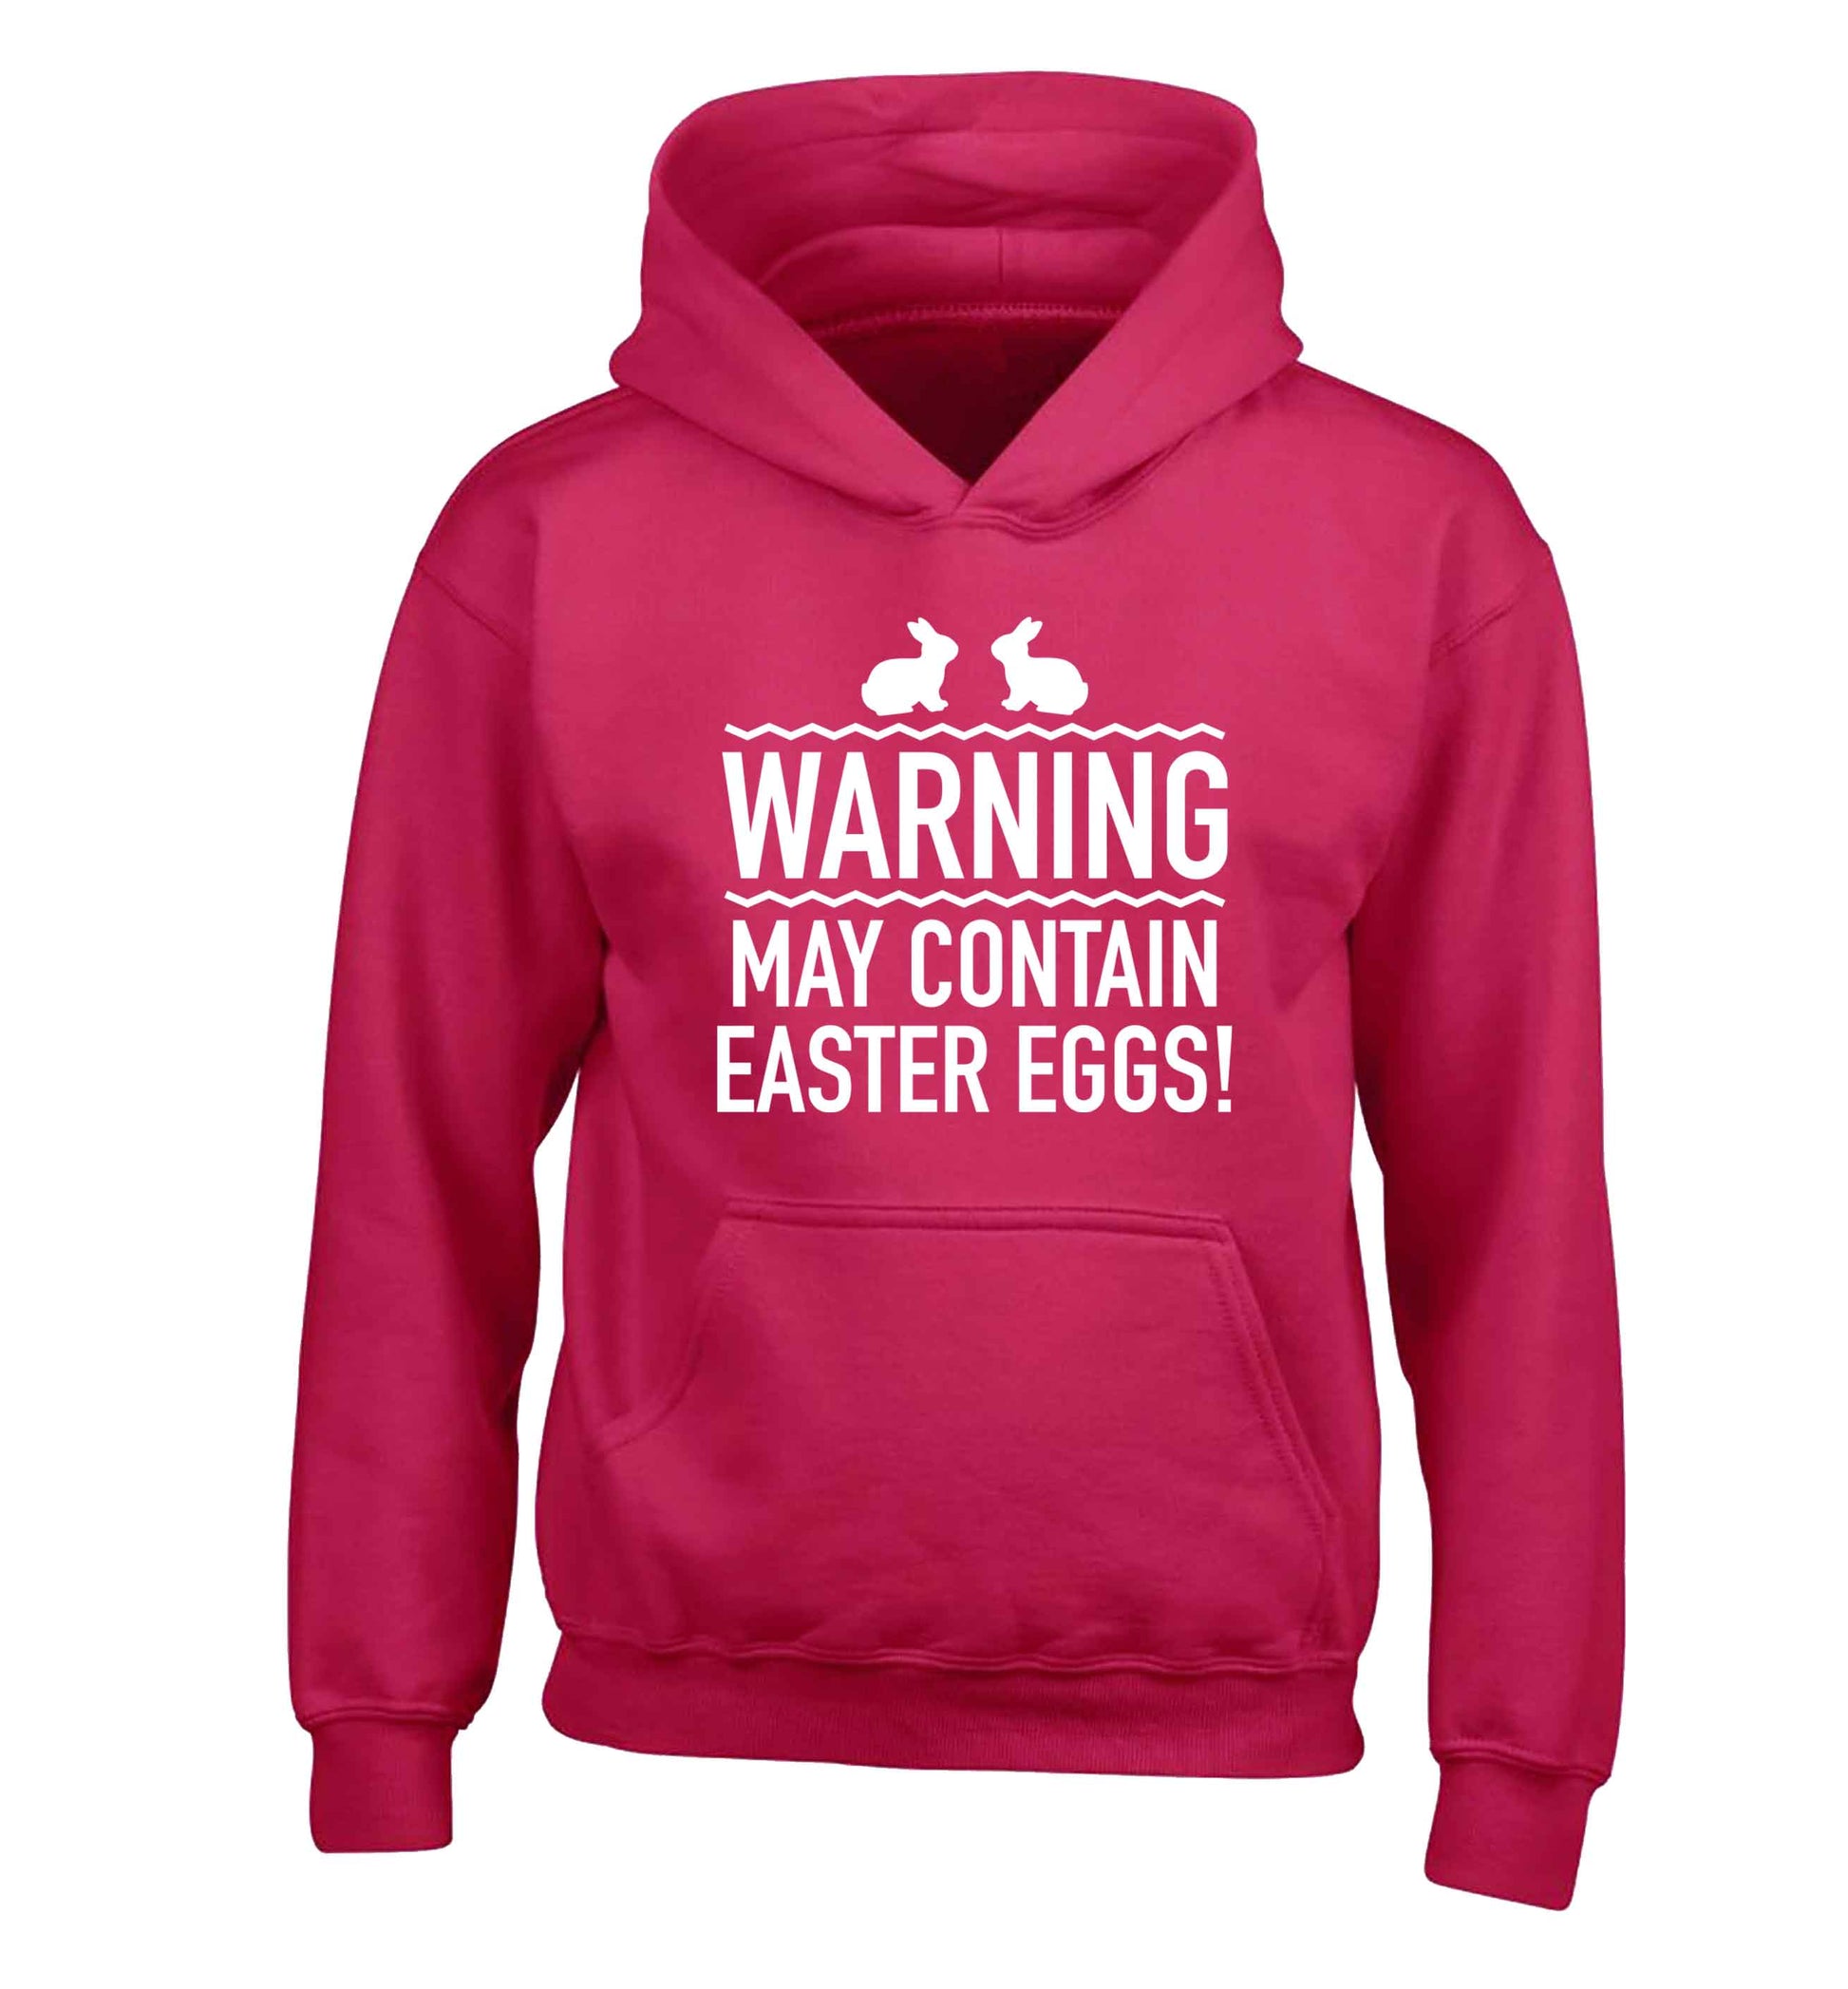 Warning may contain Easter eggs children's pink hoodie 12-13 Years